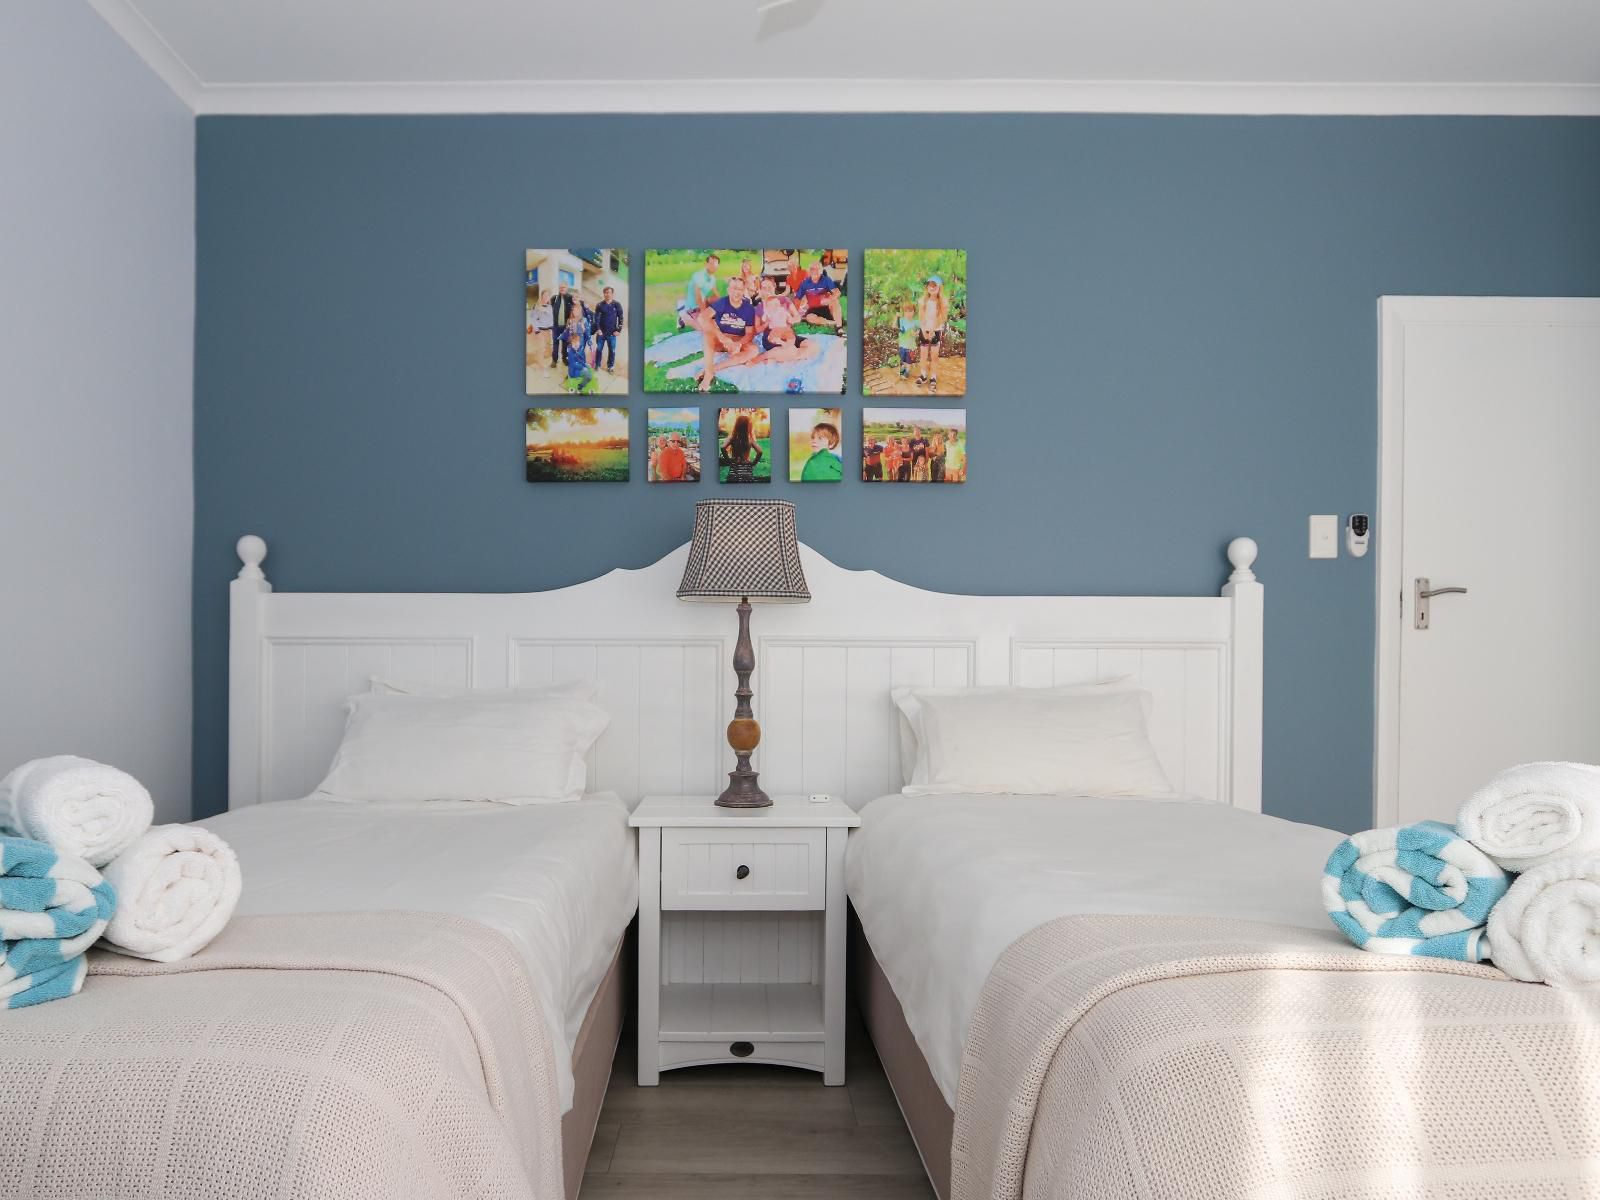 C Flat Herolds Bay Western Cape South Africa Unsaturated, Bedroom